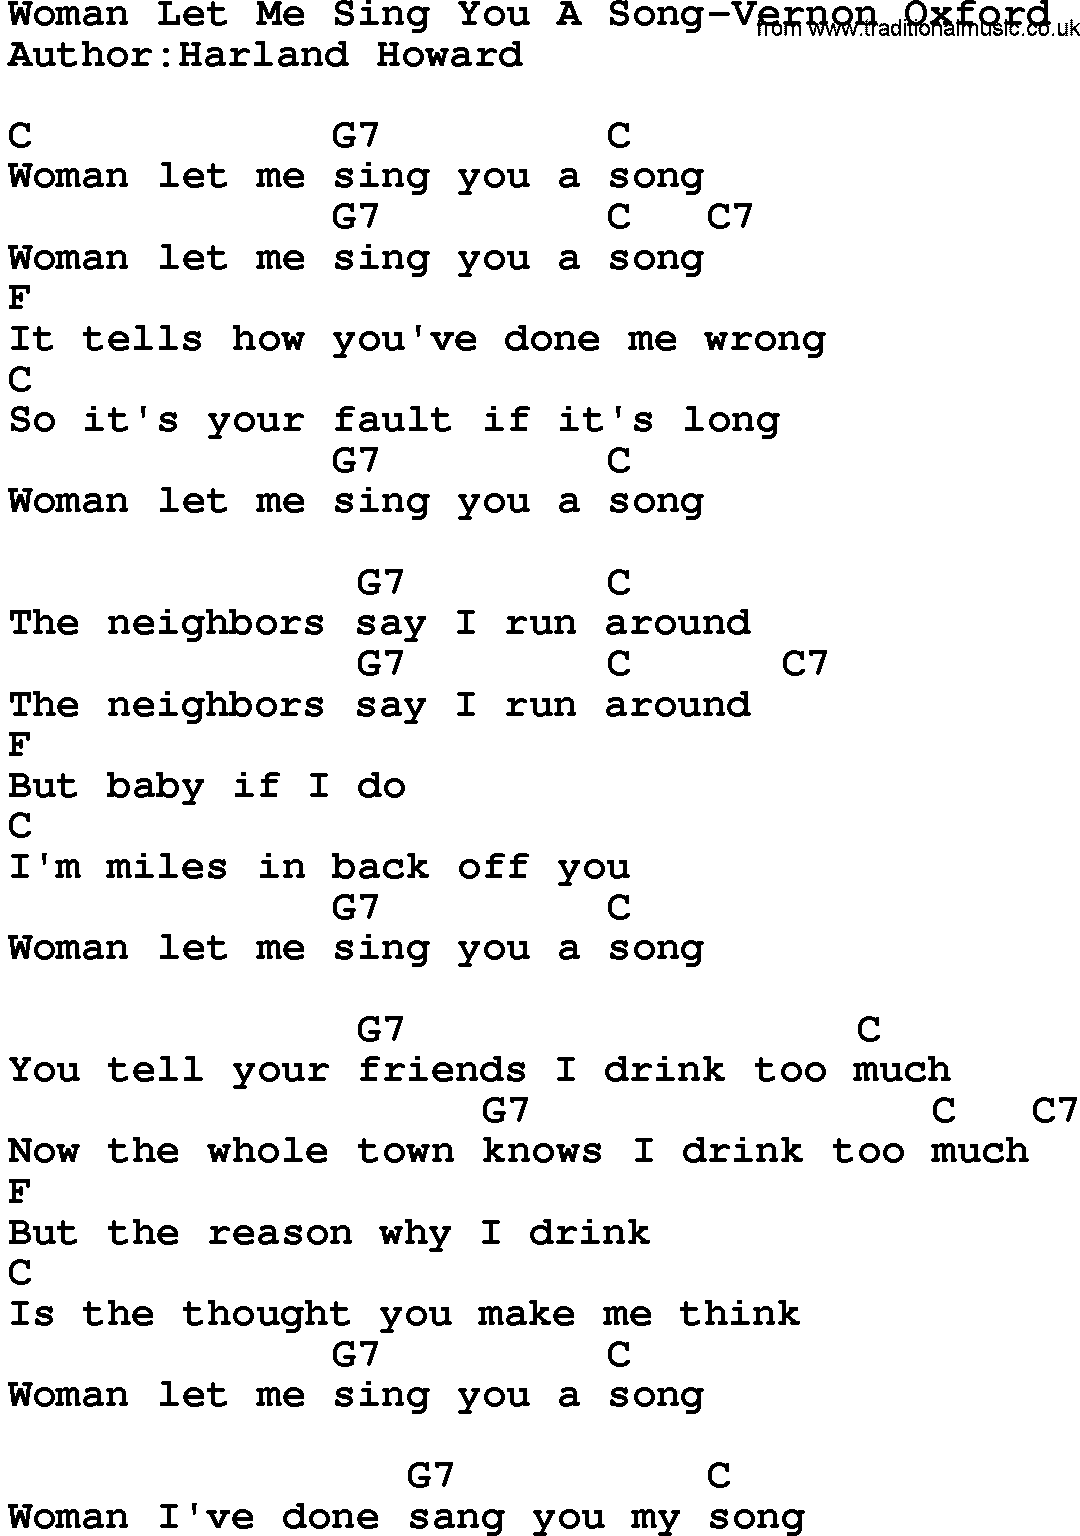 Country music song: Woman Let Me Sing You A Song-Vernon Oxford lyrics and chords